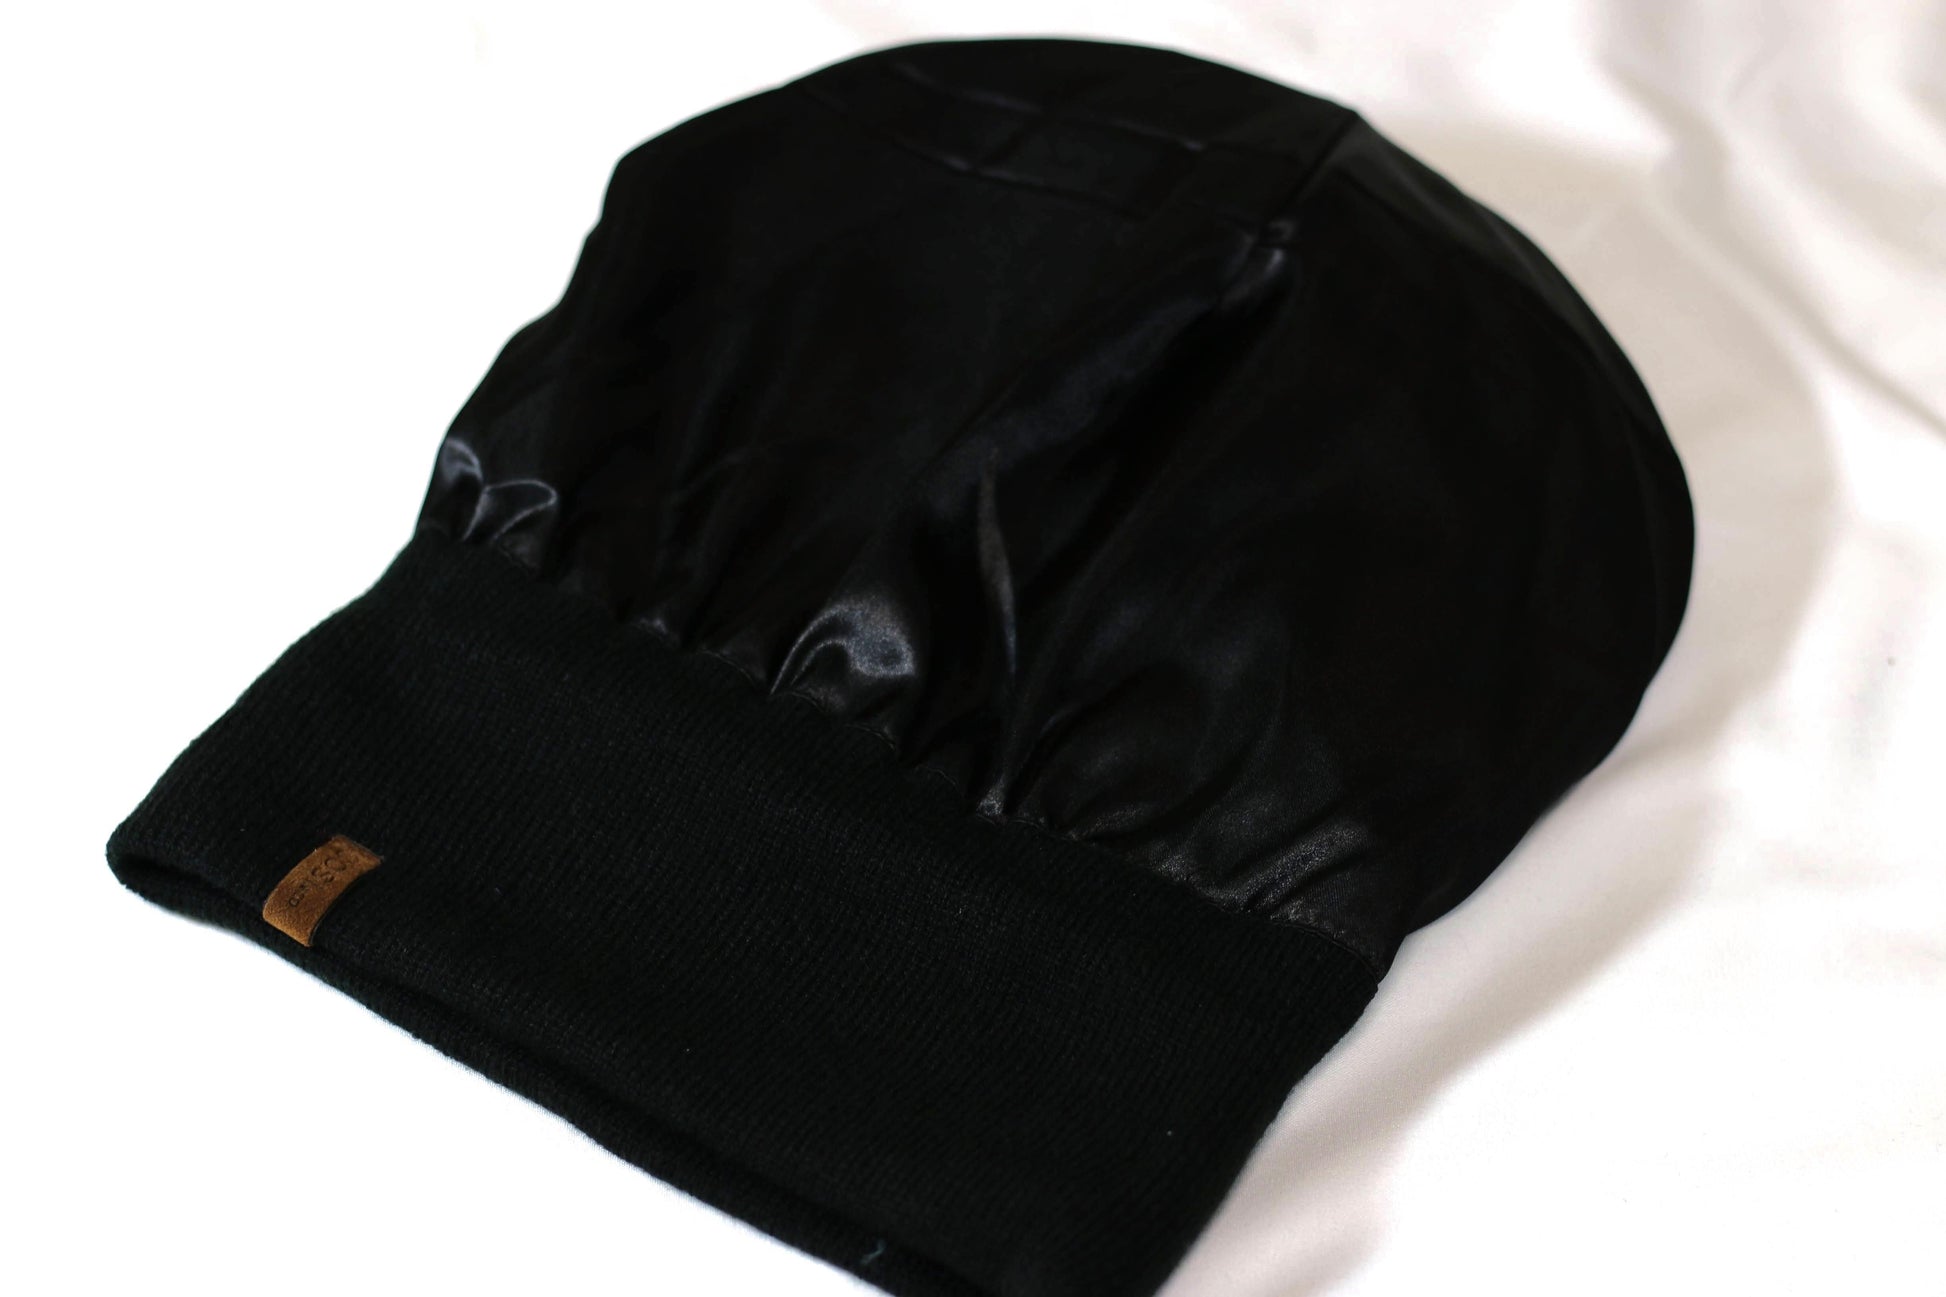 The Fit Beanie in Black - COSI & co.